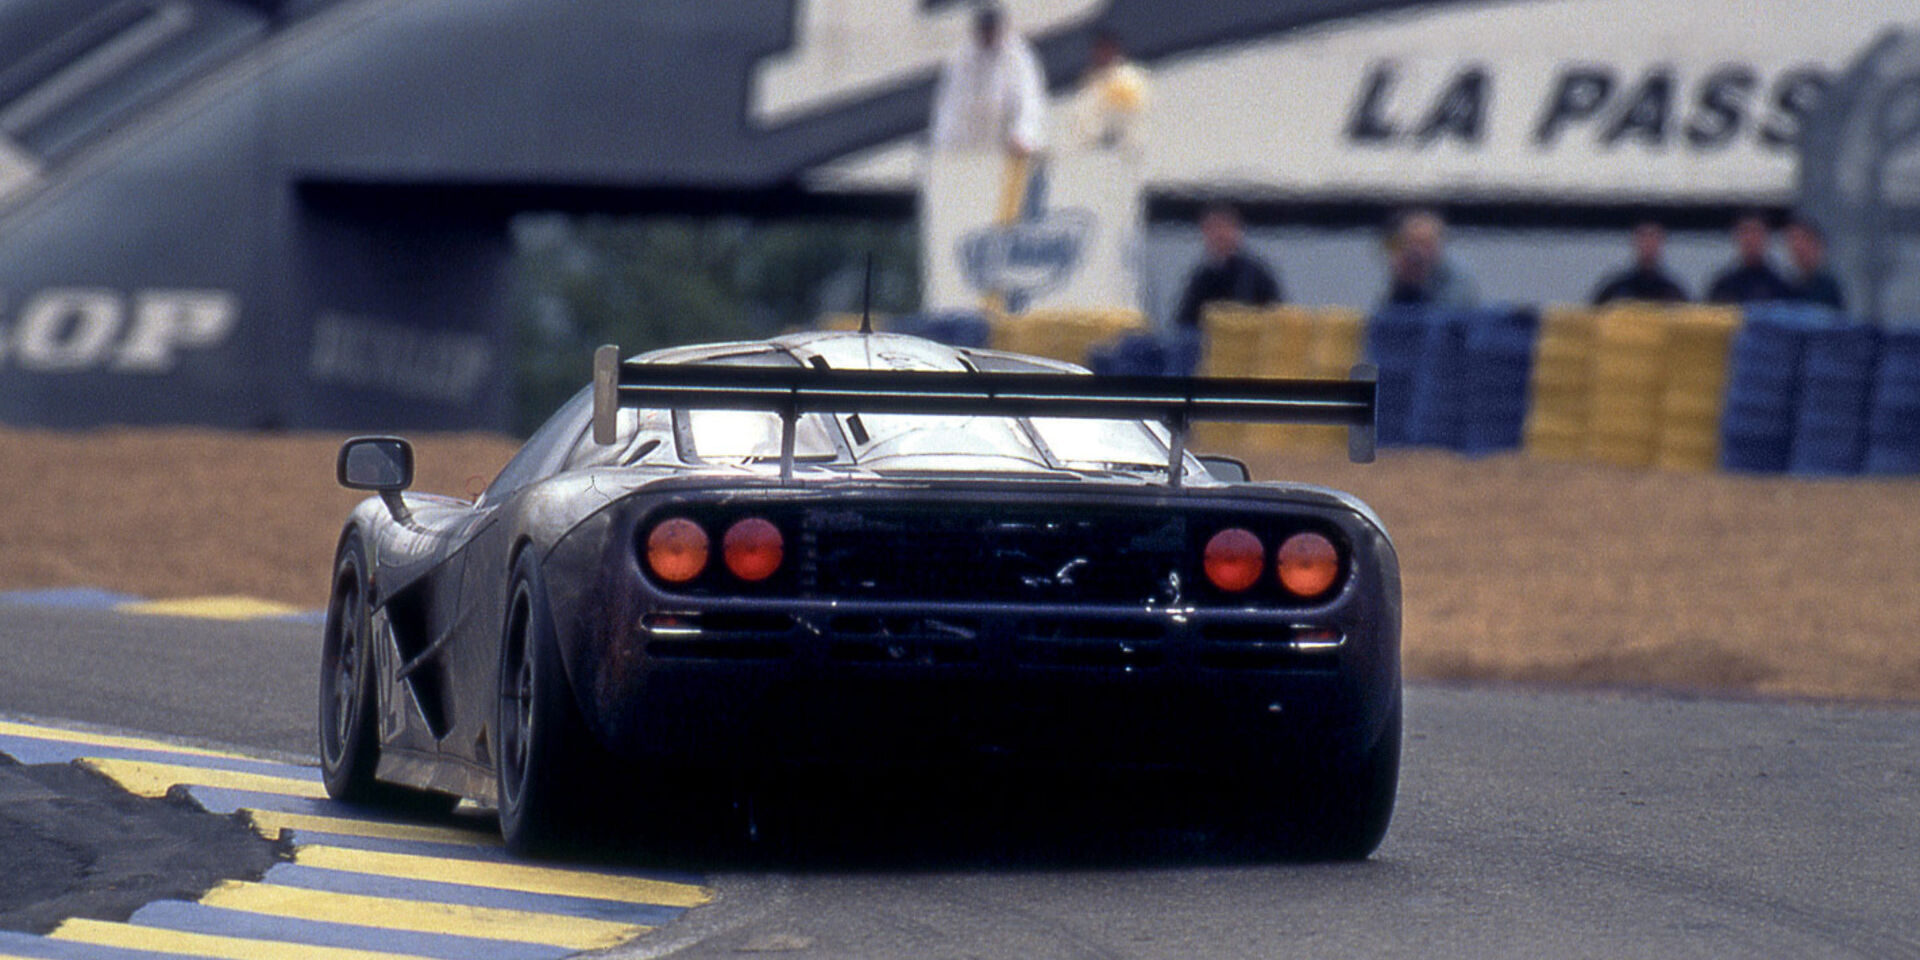 McLaren F1 - For Many, The Greatest Supercar Ever Built